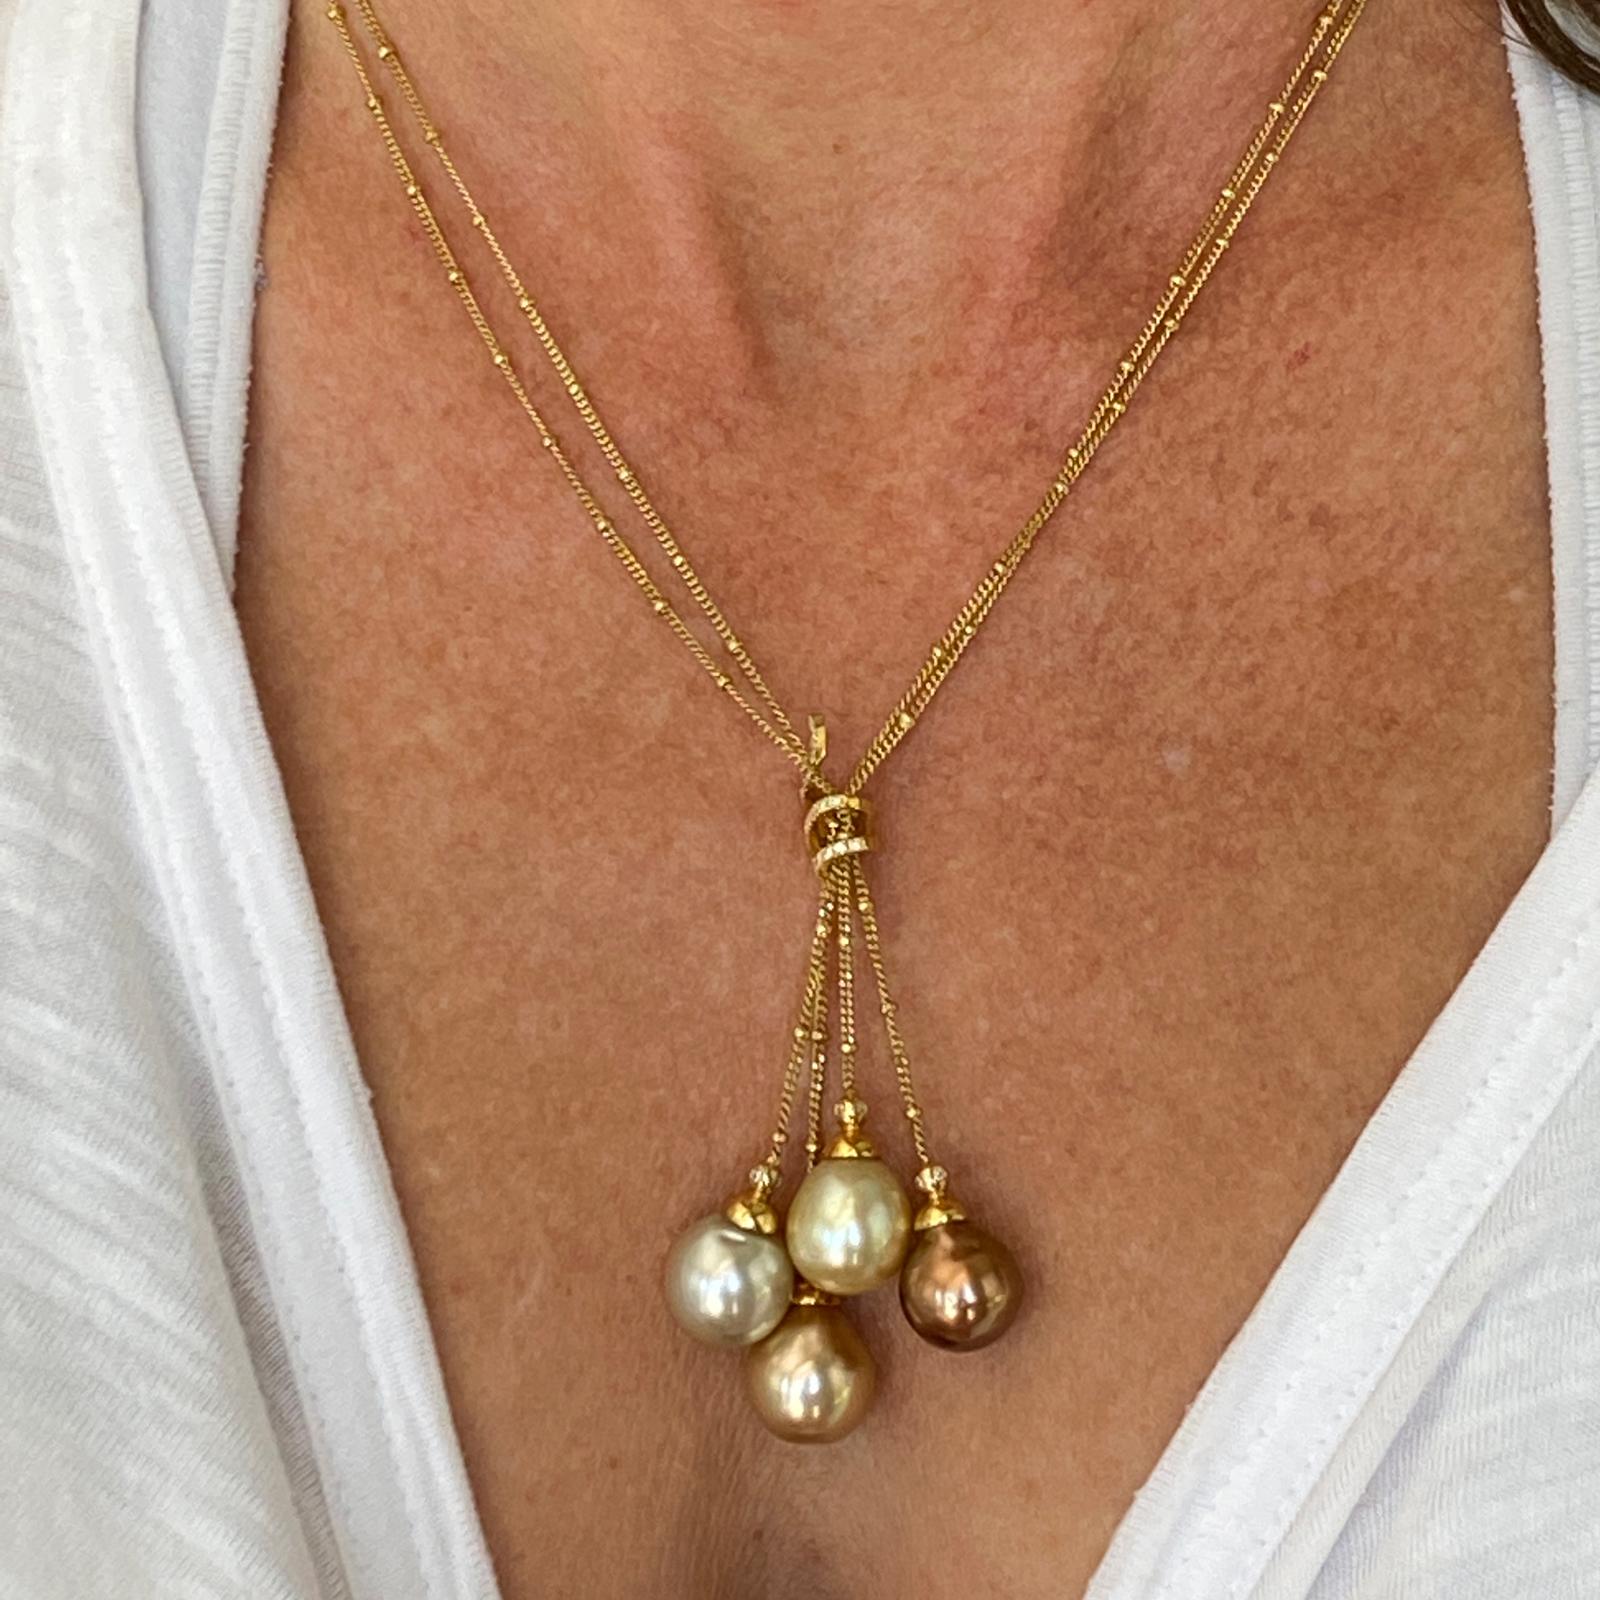 Beautiful South Sea pearl and diamond drop necklace, by designer Yvel,  fashioned in 18 karat yellow gold. The necklace features 4 multi-color baroque South Sea pearls measuring 11.2-12.1mm, and 23 round brilliant cut diamonds weighing .18 CTW